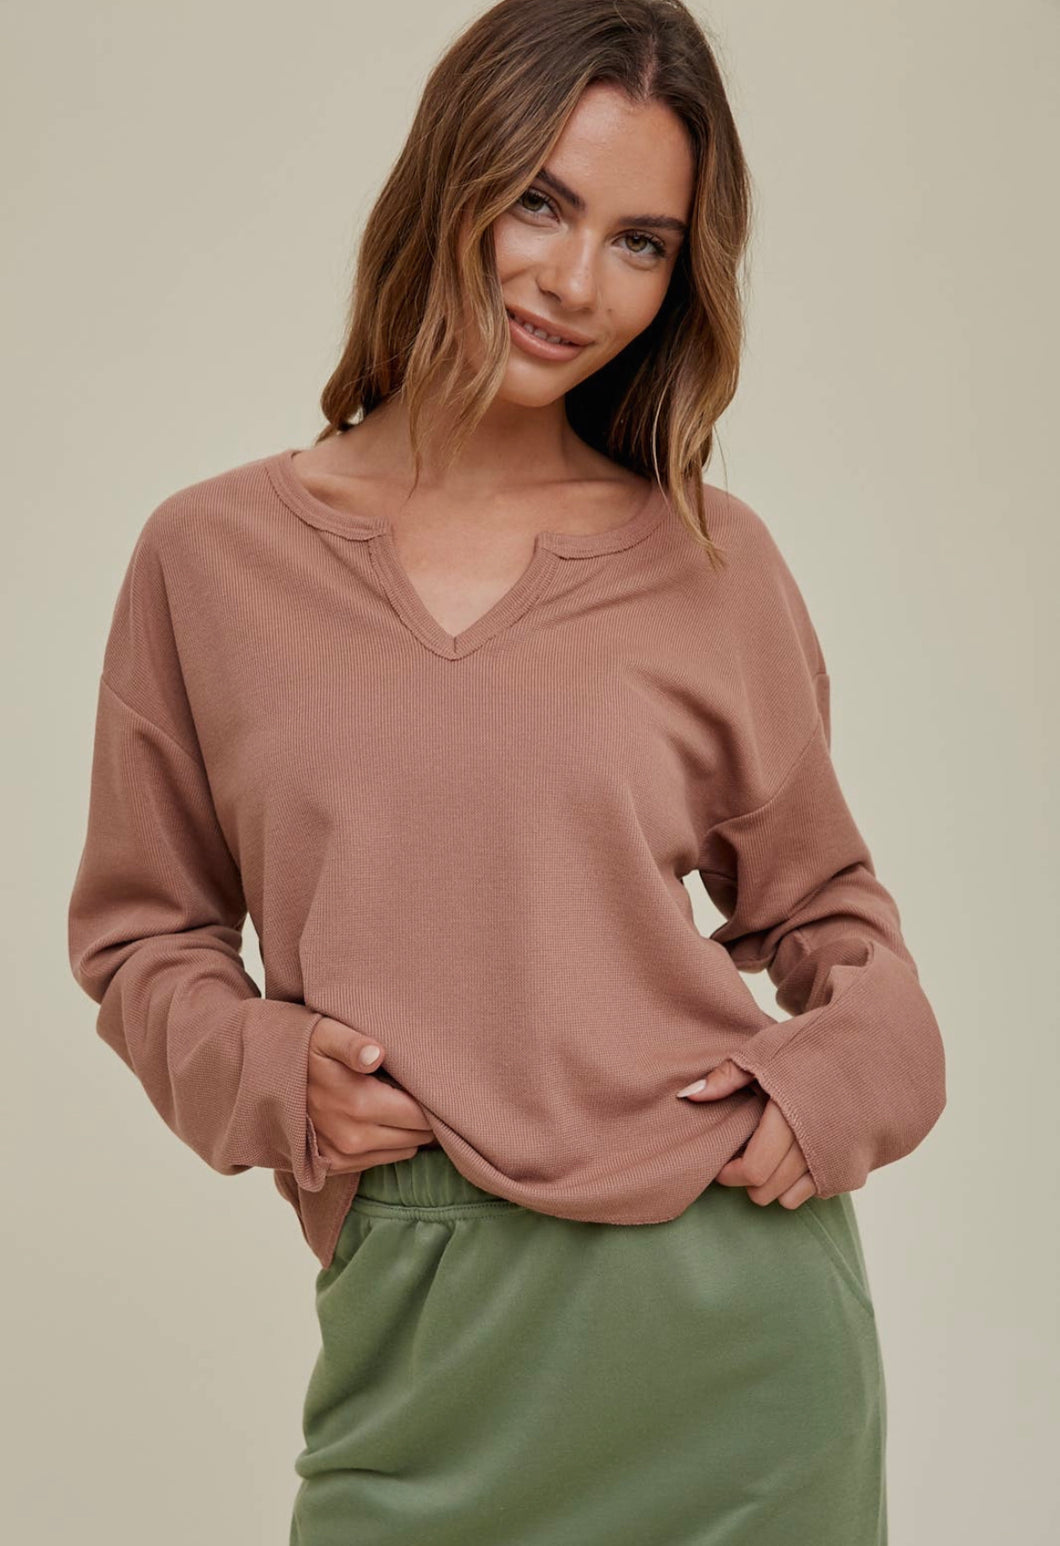 The Rosie Top